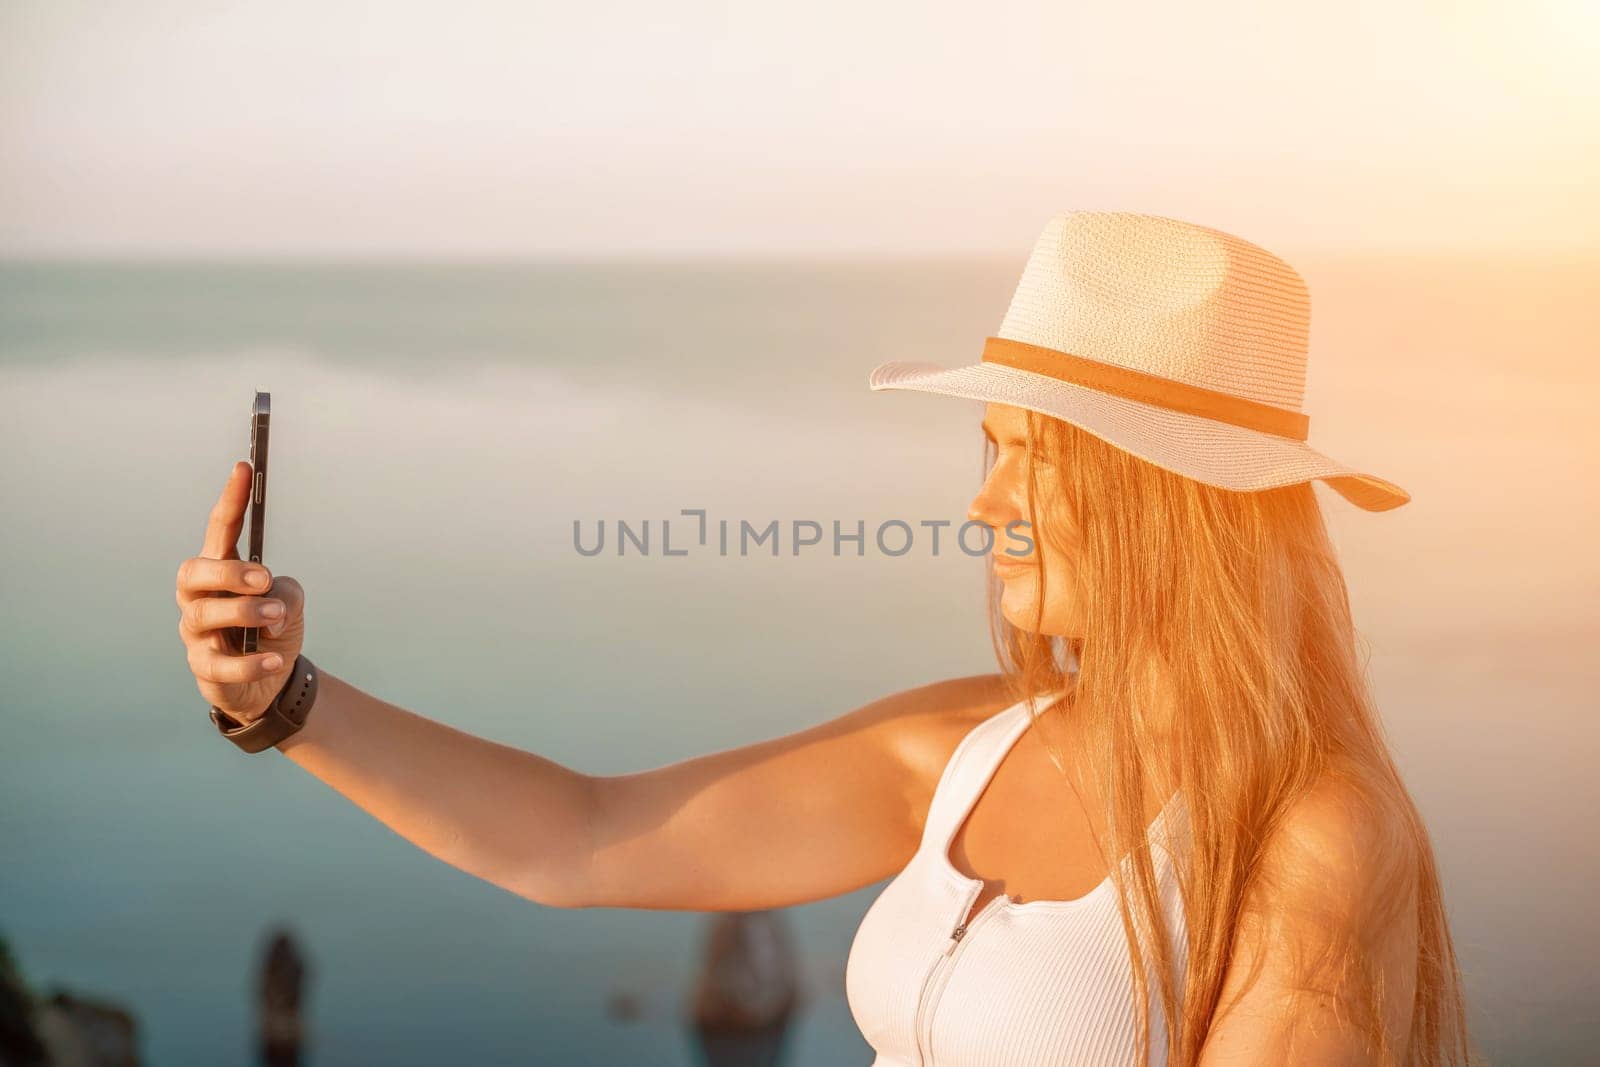 Selfie woman in a hat, white tank top, and shorts captures a selfie shot with her mobile phone against the backdrop of a serene beach and blue sea